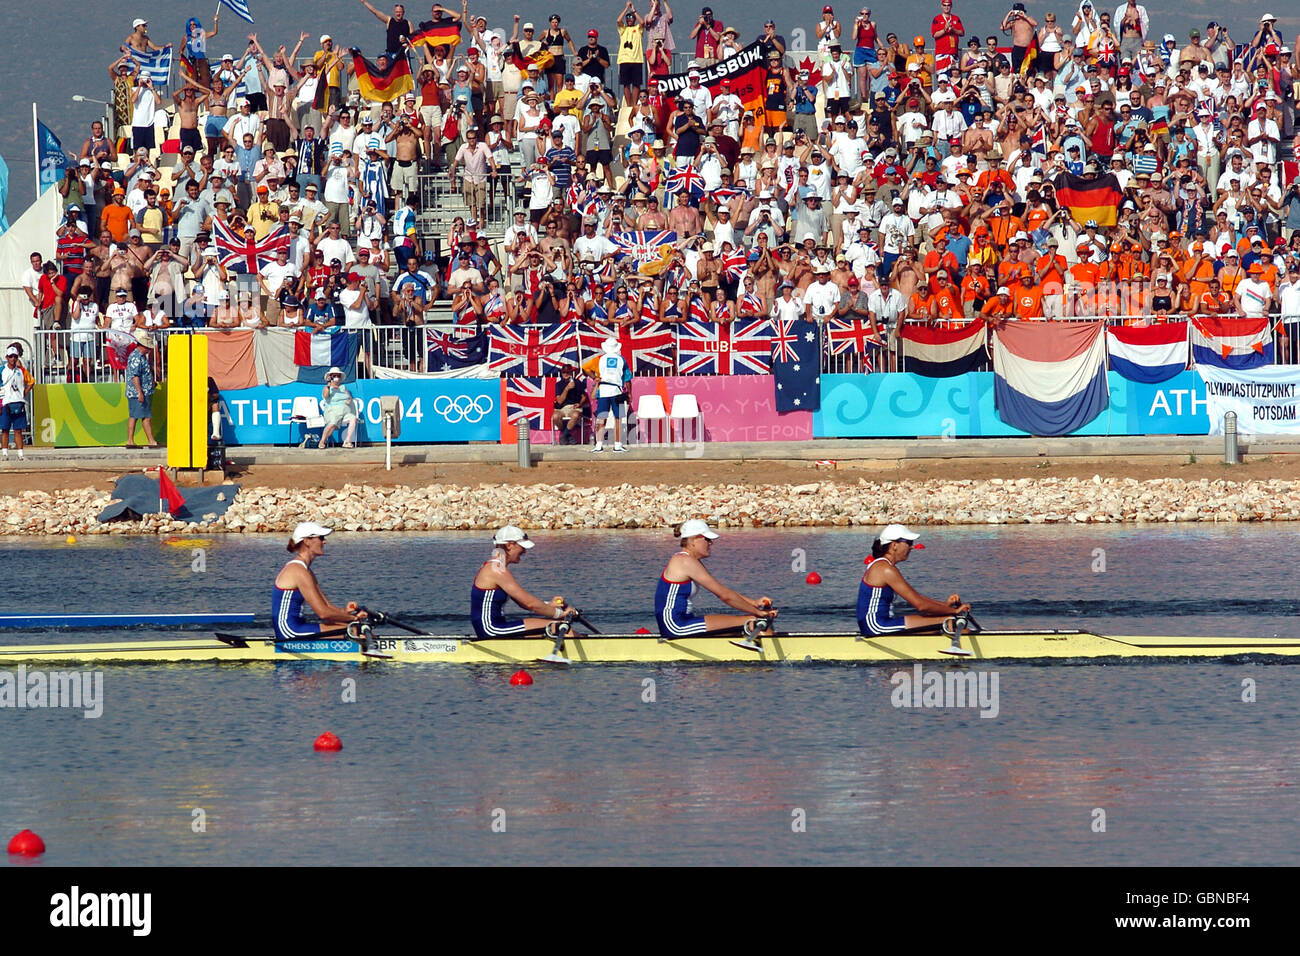 Rowing - Athens Olympic Games 2004 - Women's Quadruple Sculls - Final. A general view of the Great Britian team in action in the final Stock Photo